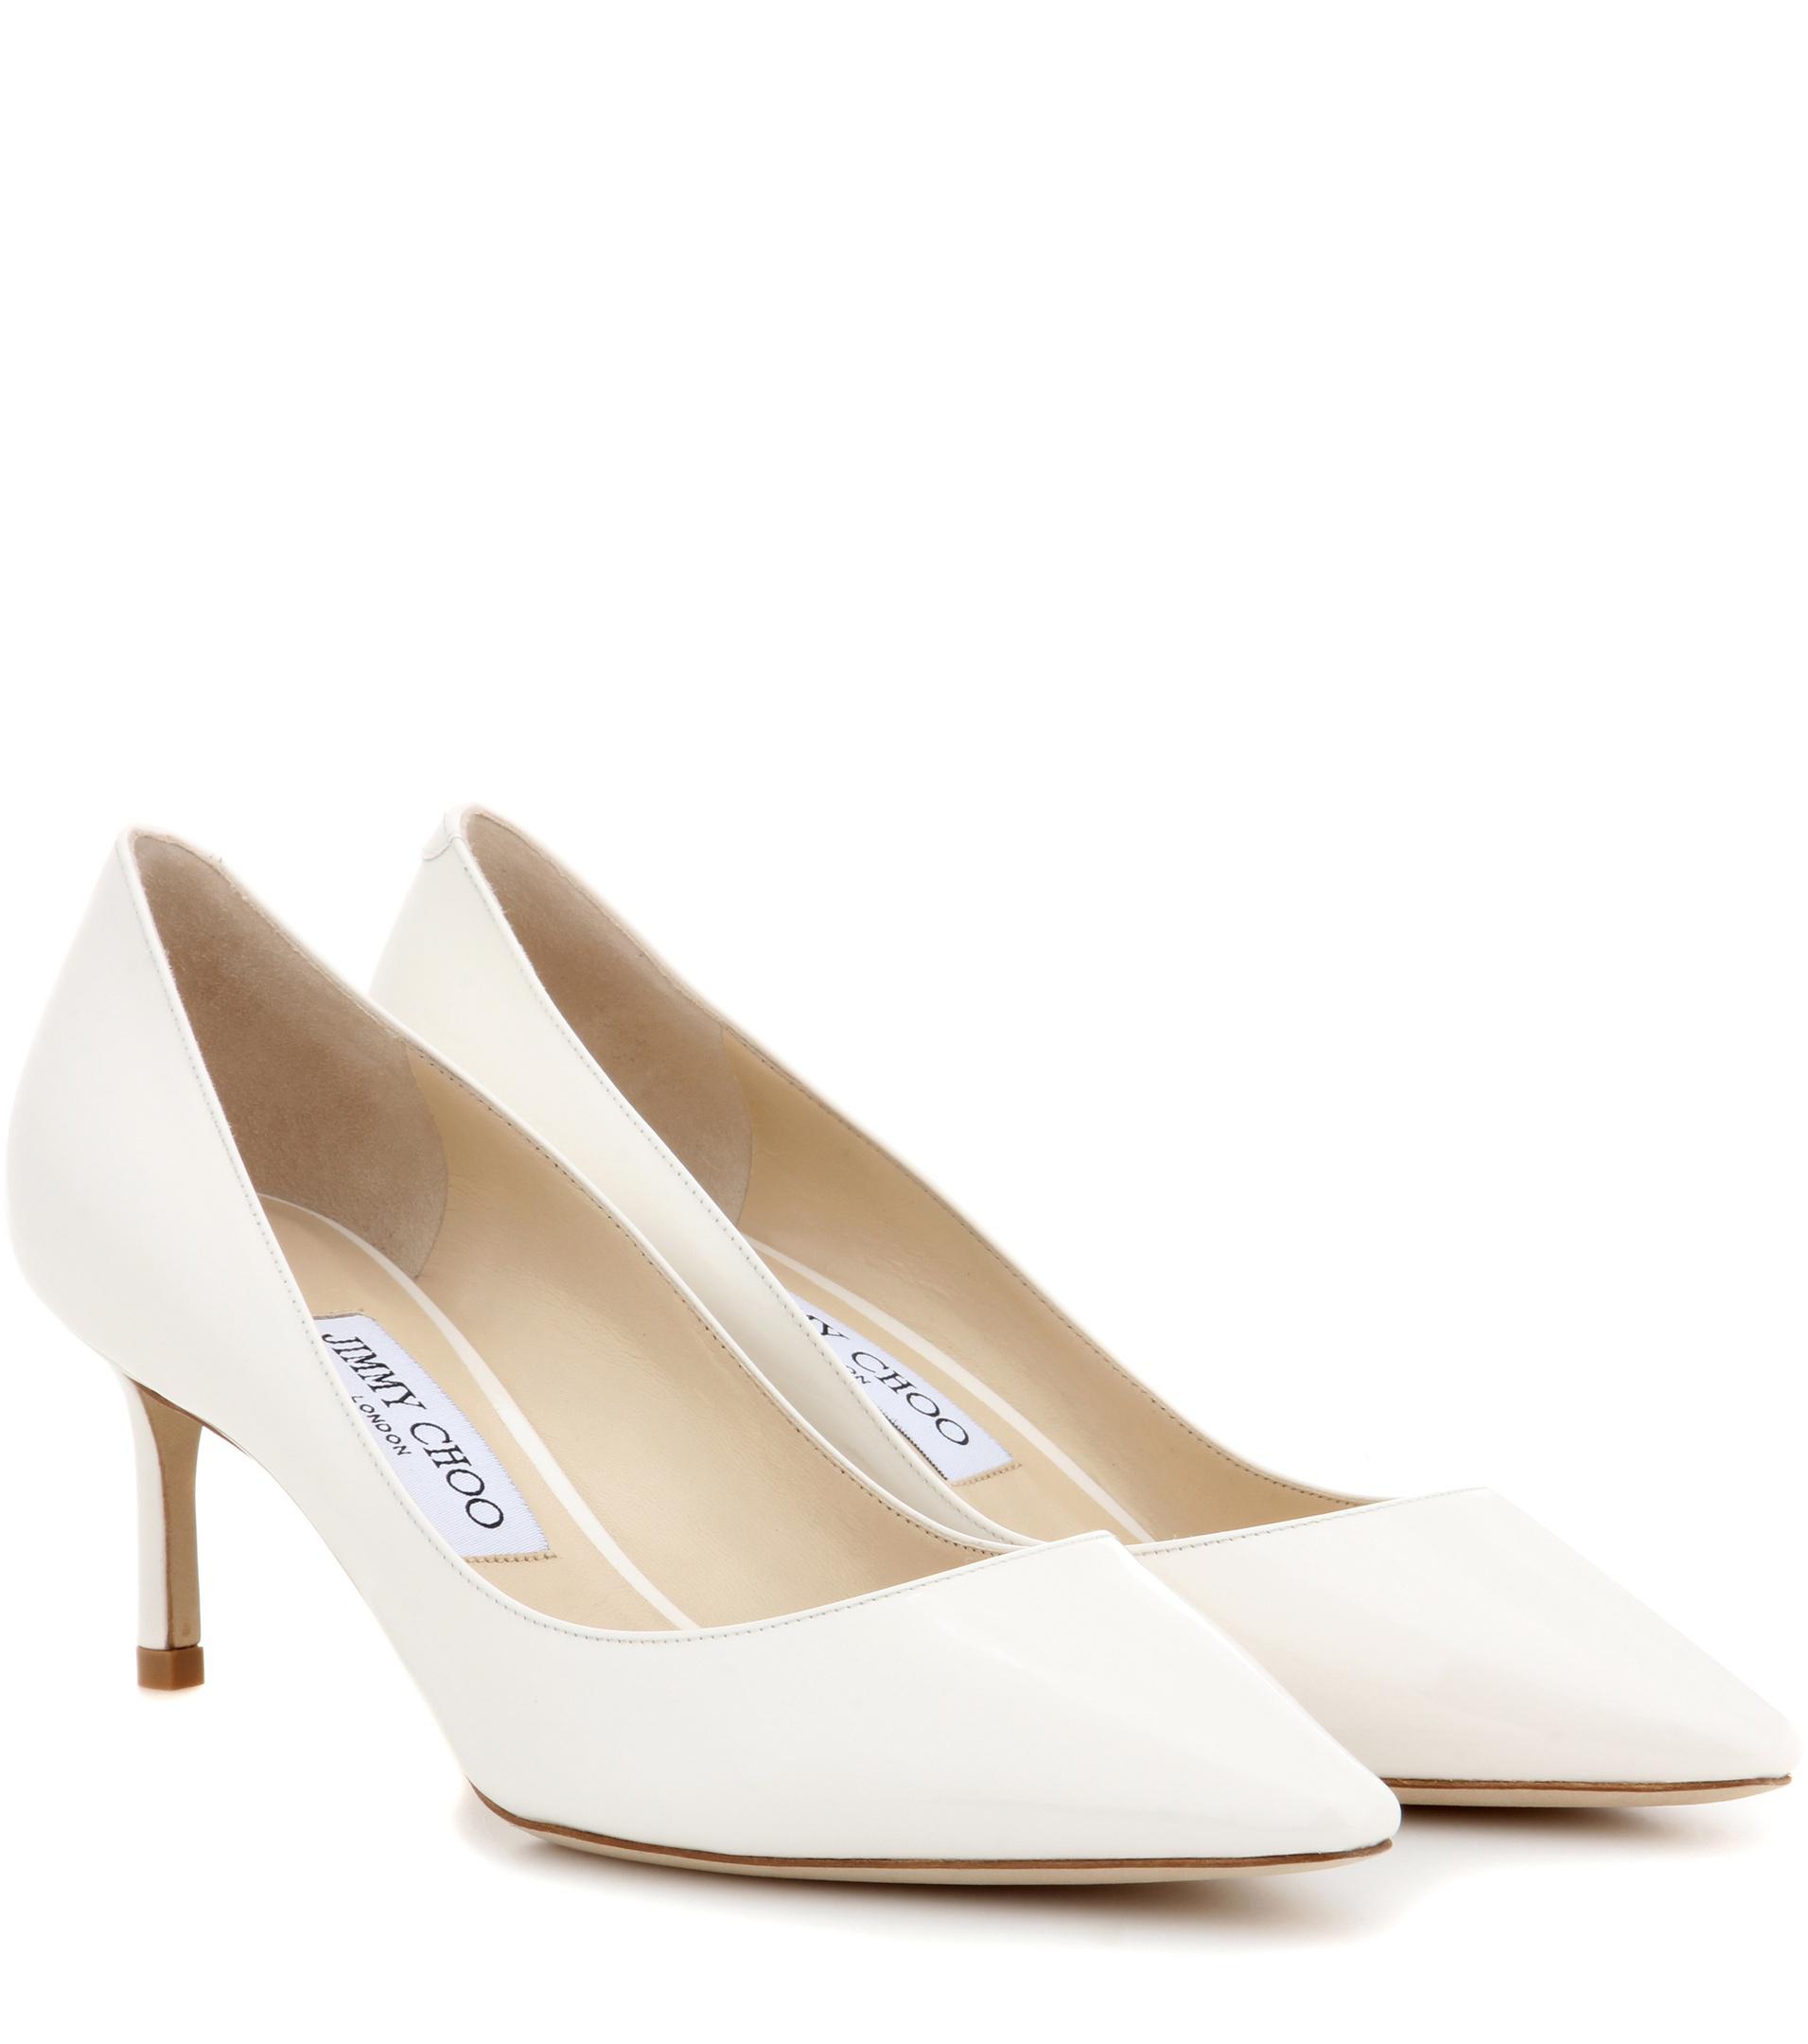 Jimmy Choo Romy 60 Patent Leather Pumps in White - Lyst